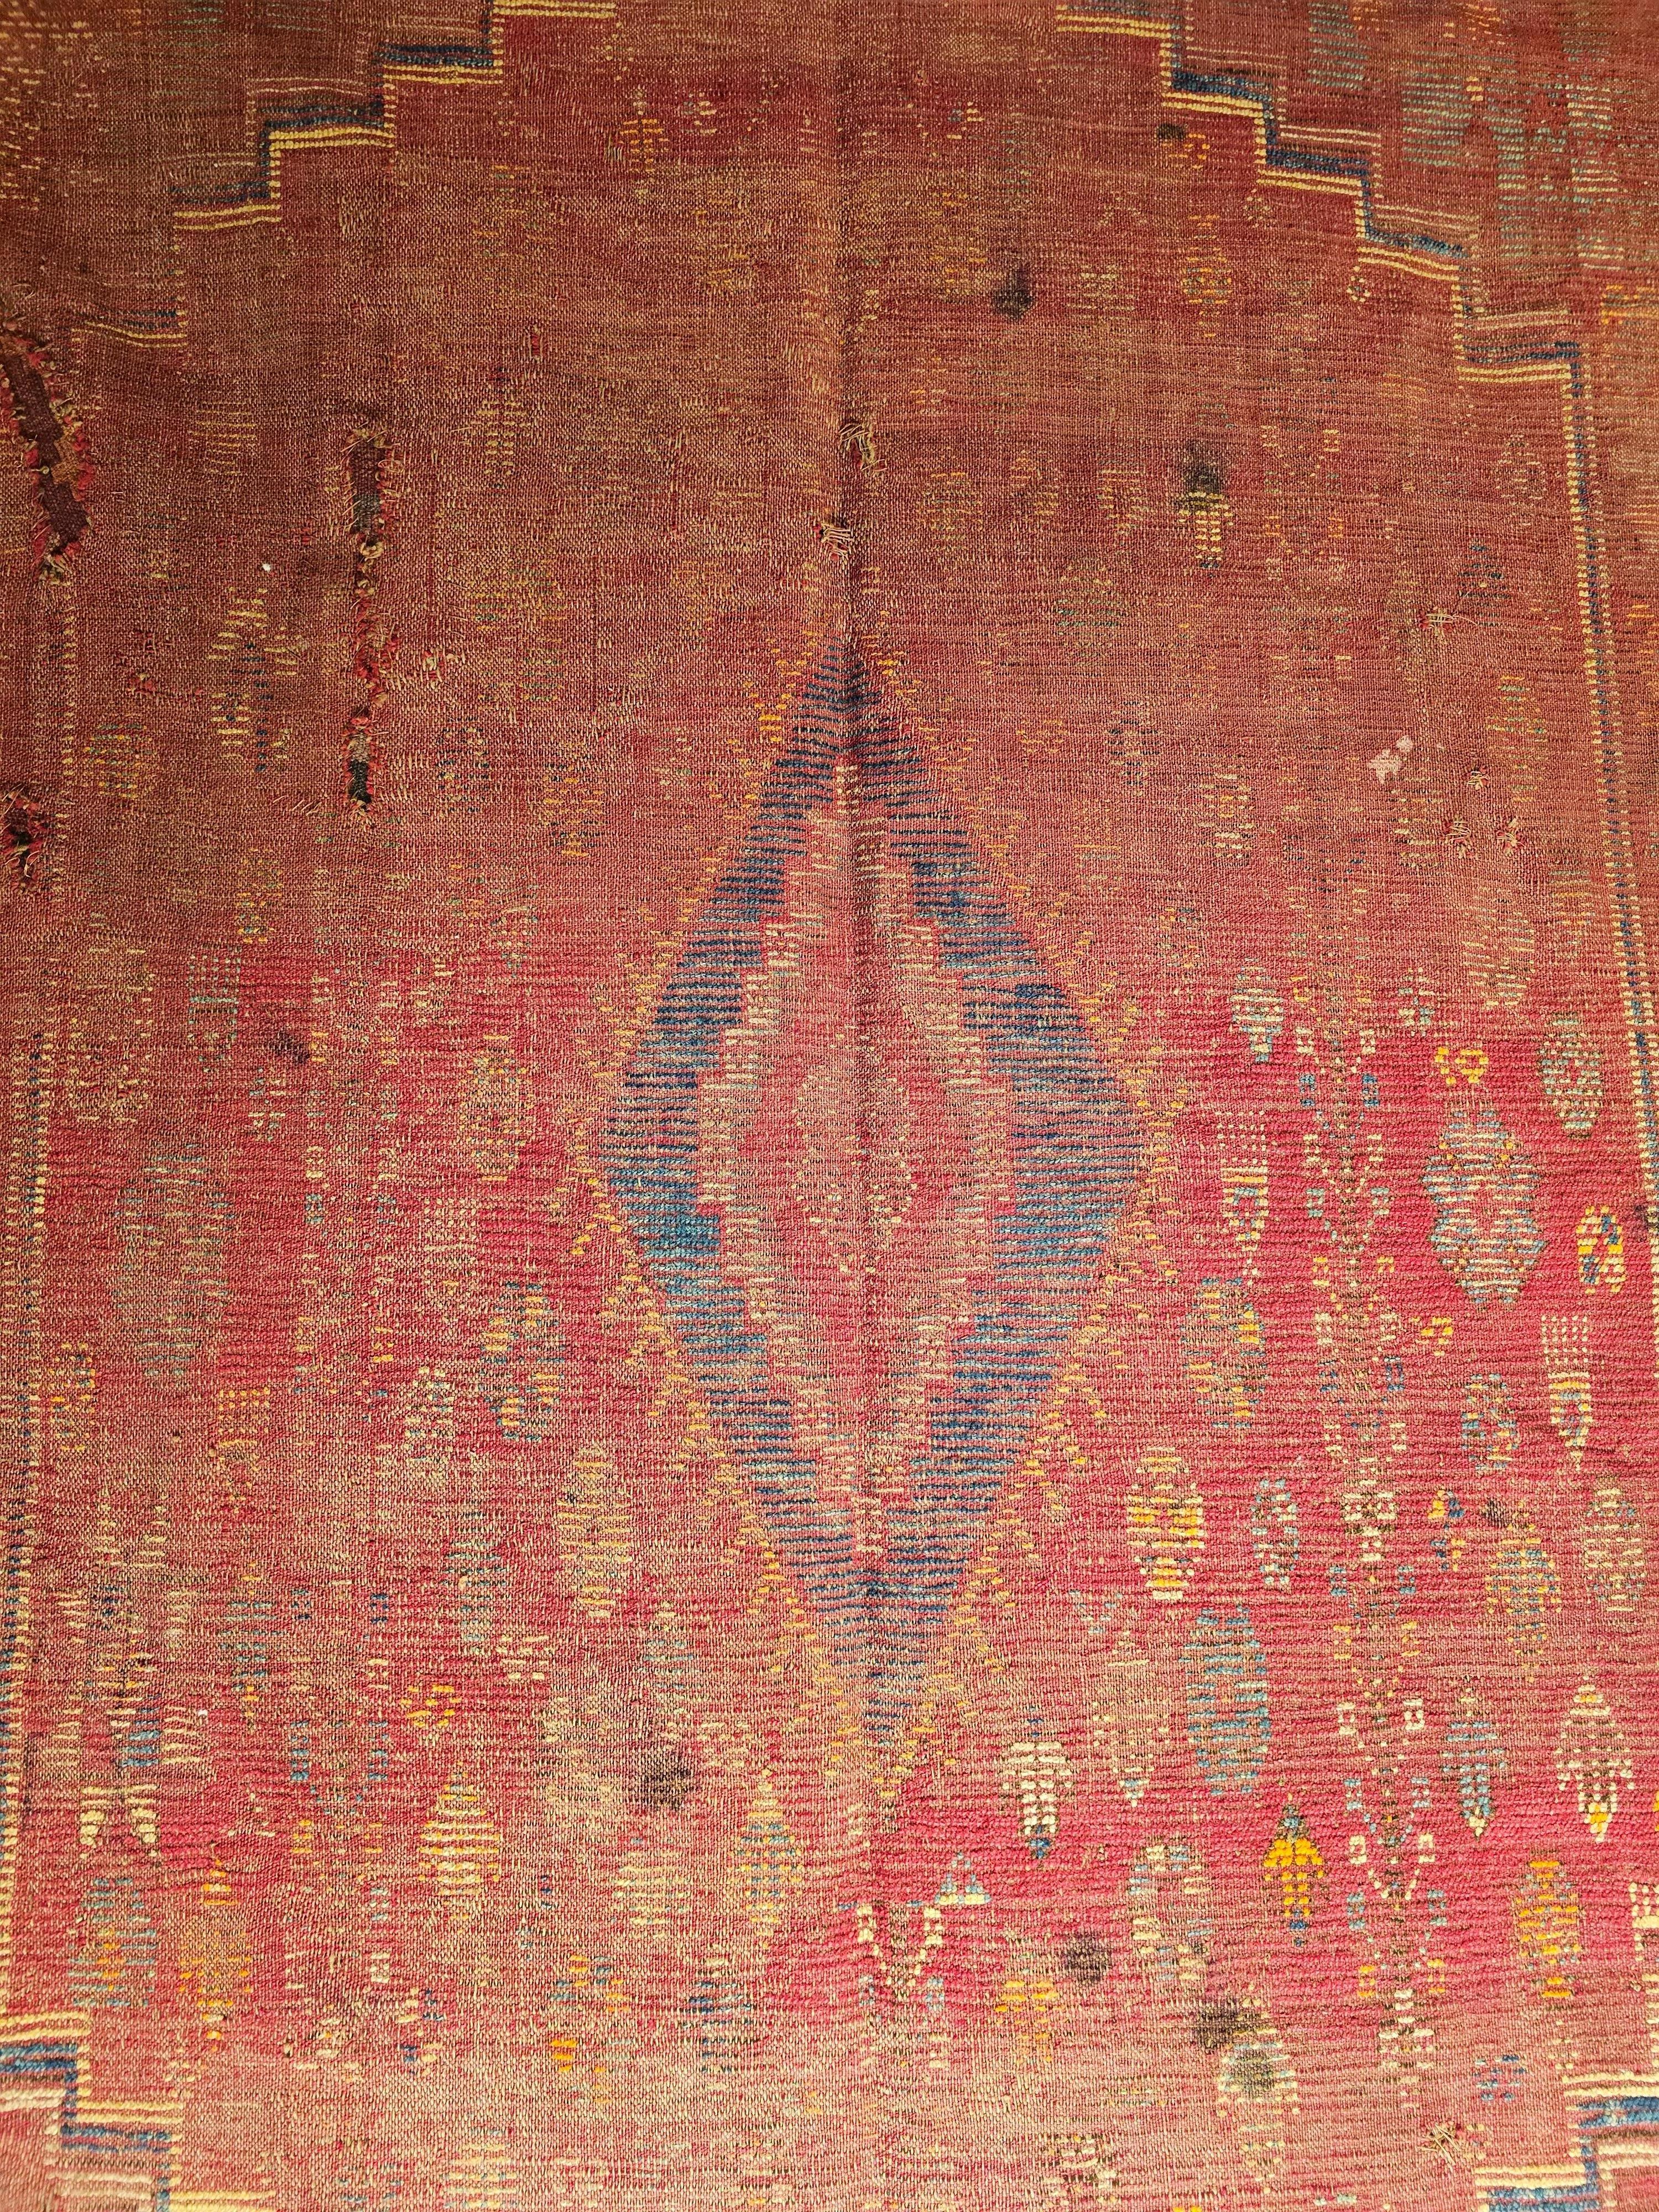 19th century Moroccan Rabat tribal carpet in a geometric pattern in a gallery/corridor size in red, yellow, turquoise, green, ivory and brown colors.  The use of vegetable dyes have produced beautiful shades in earth tone colors in the field and the